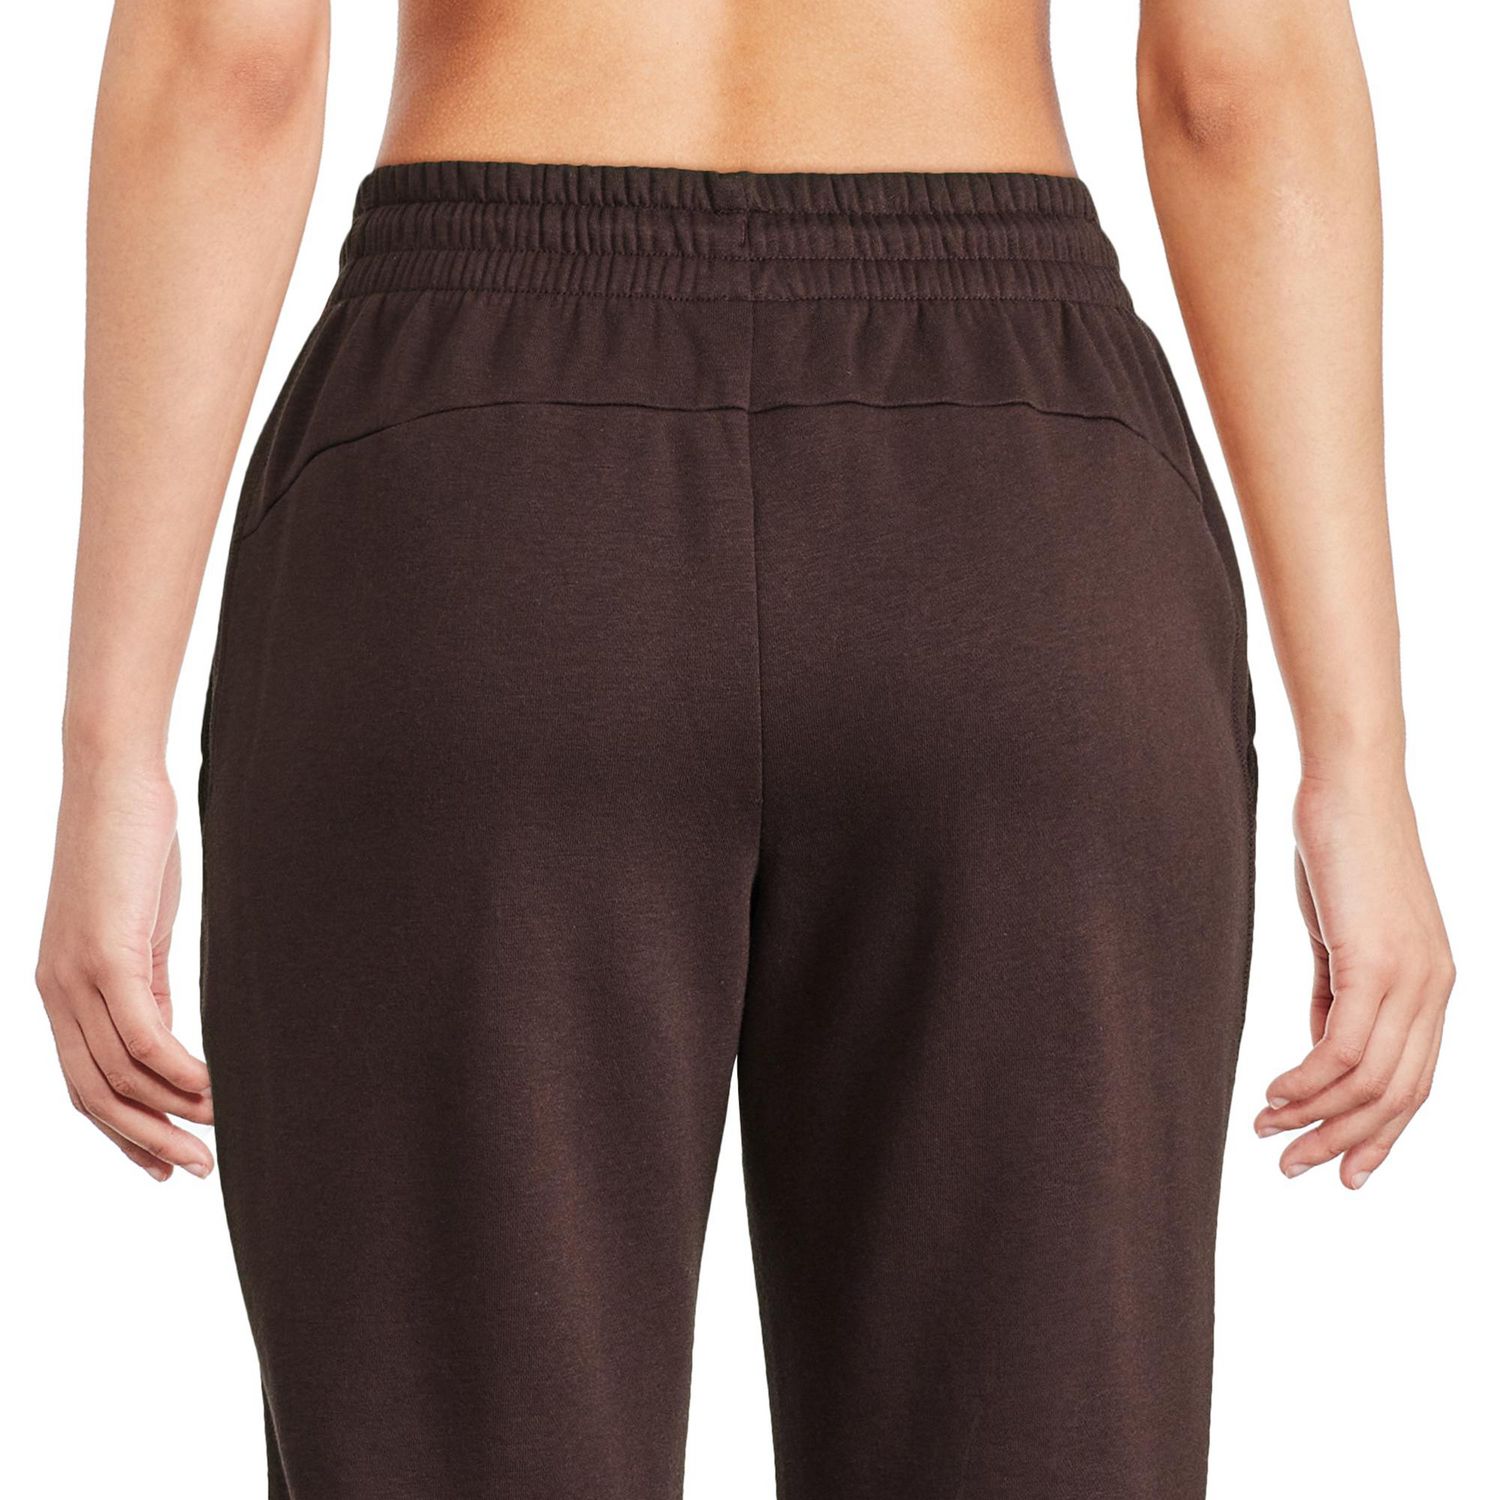 Women's Athletic Bottoms - Shorts, Joggers, Leggings, & Pants – Tagged  sweatpants – Vitality Athletic Apparel